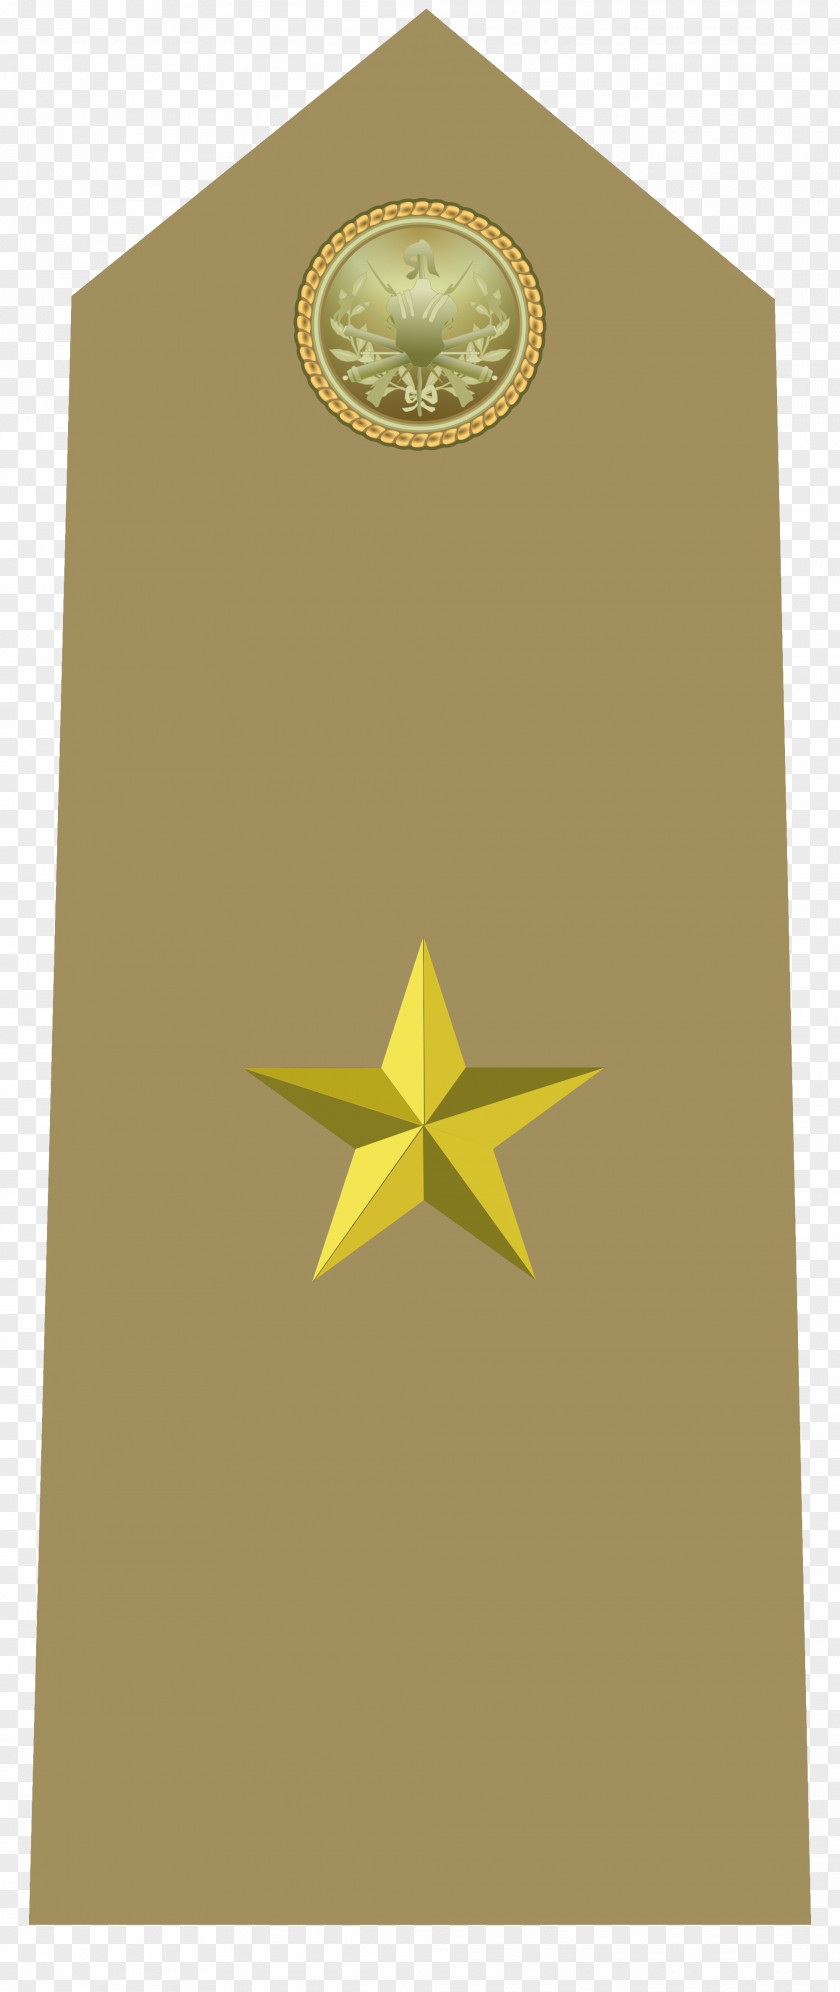 Army Military Navy Wiki PNG